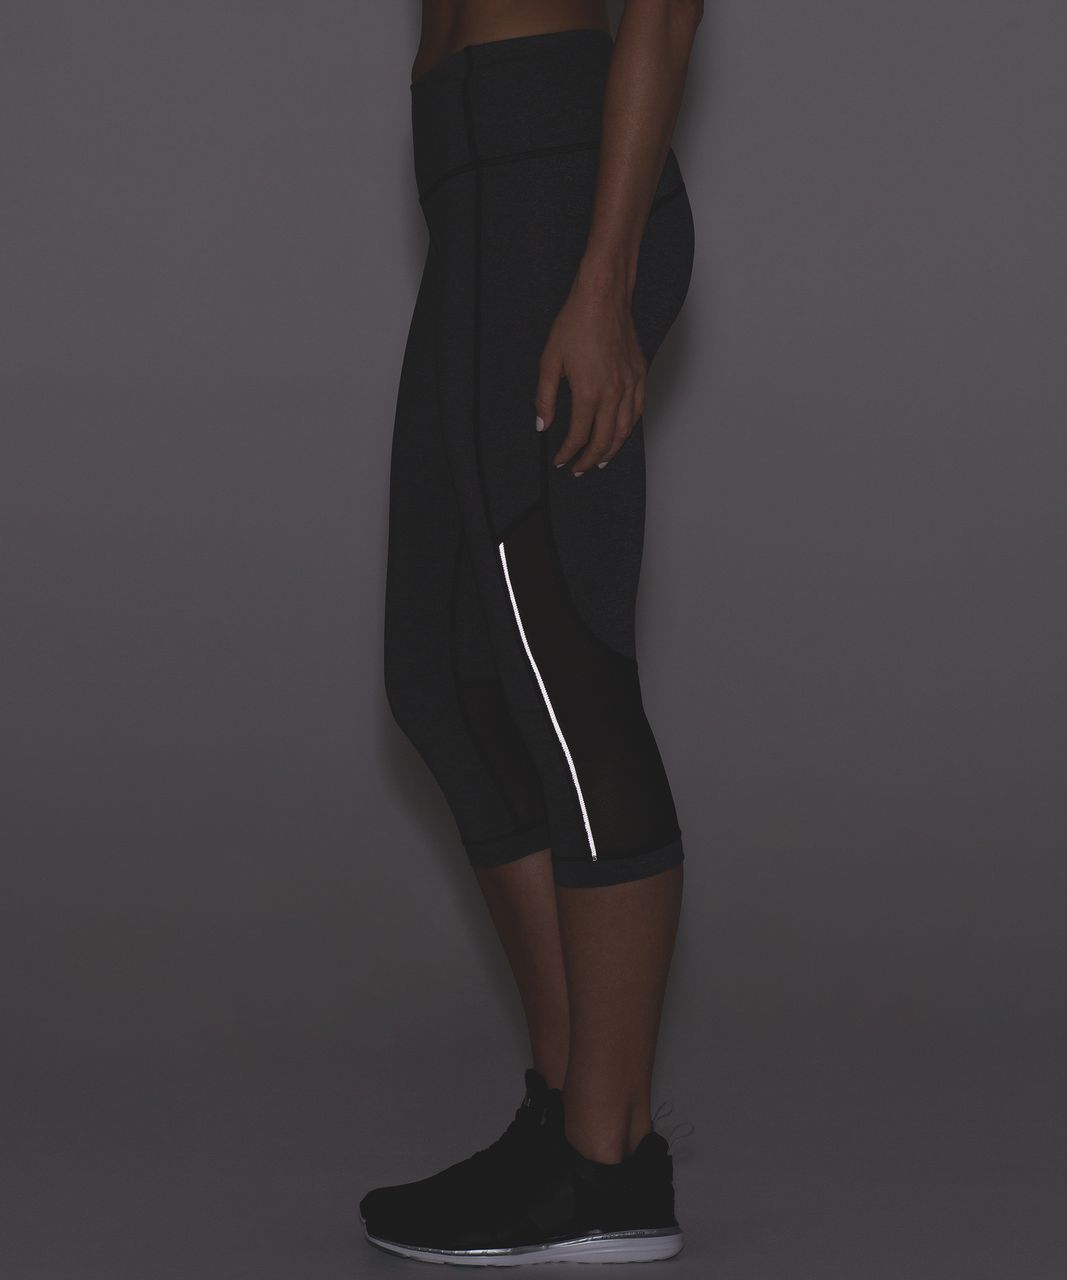 Cropped Under Armor leggings with mesh